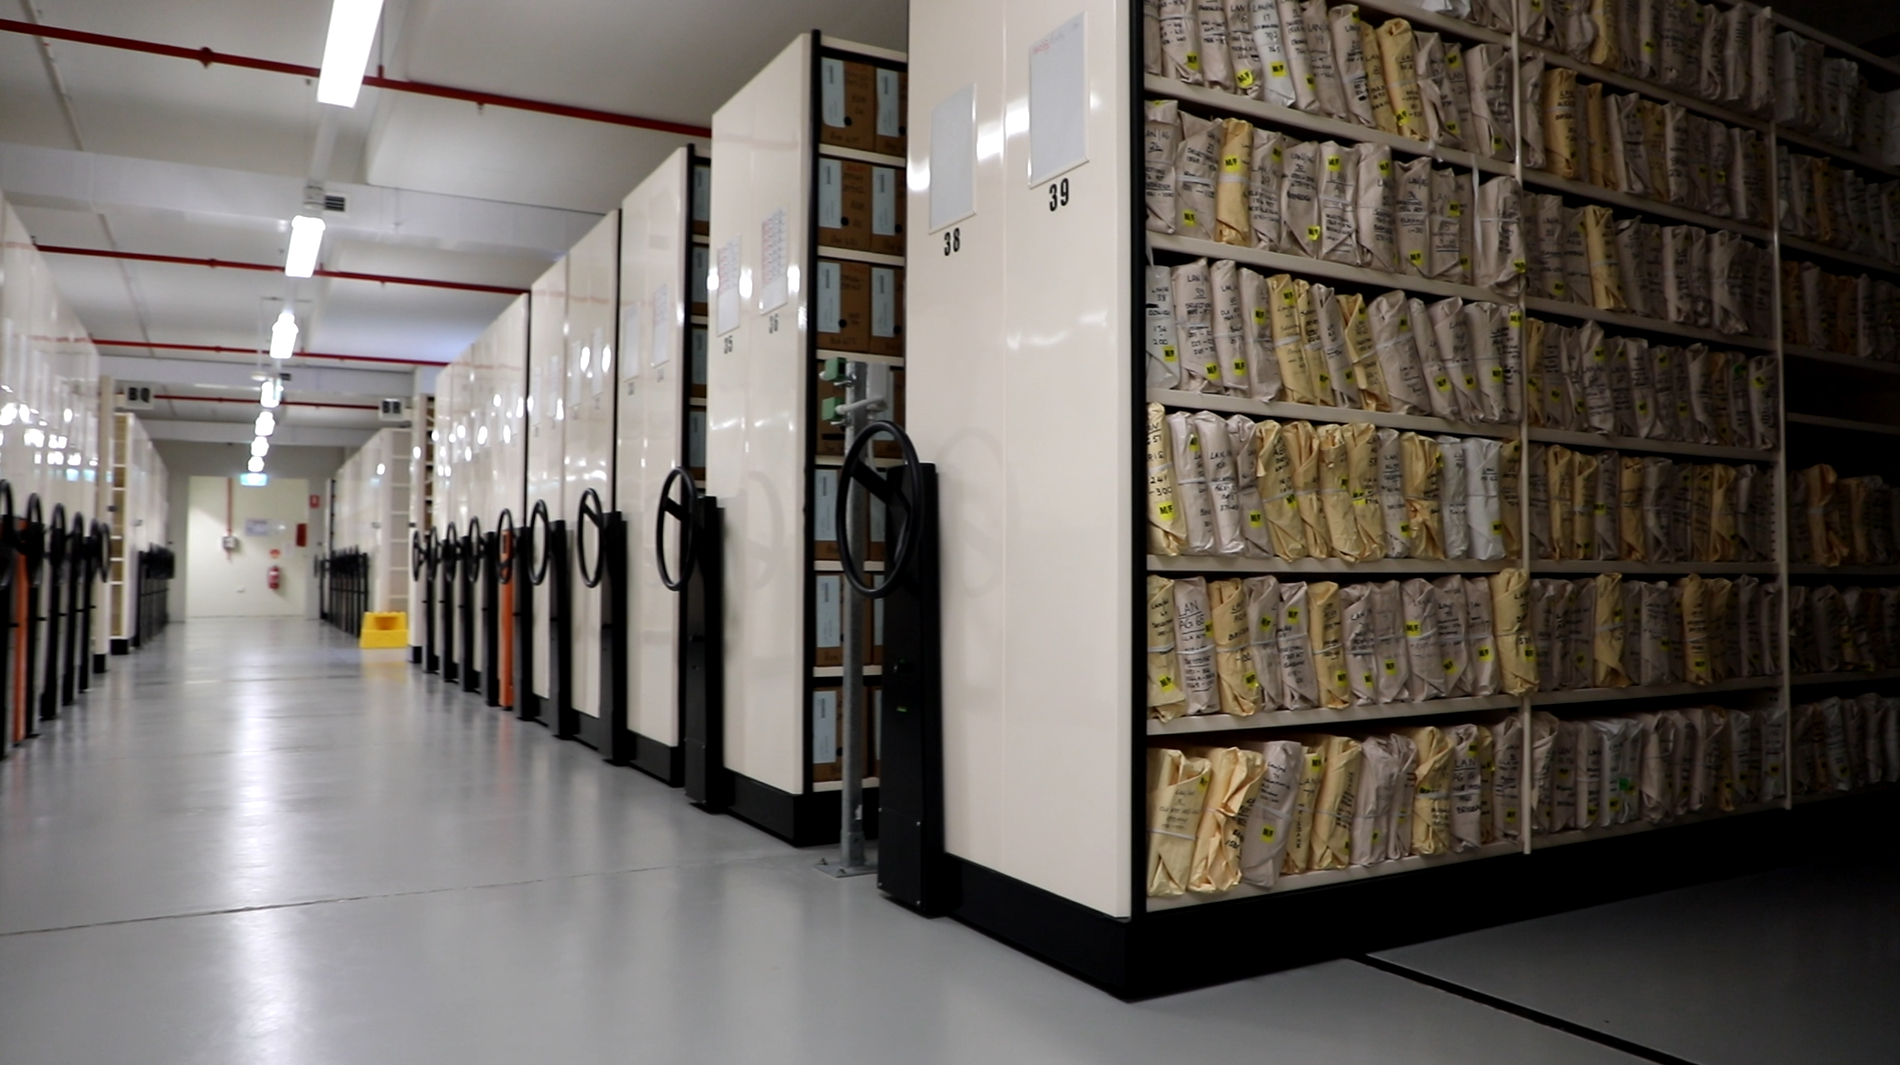 Photo of repository at Queensland State Archives showing shelves filled with wrapped bundles of records